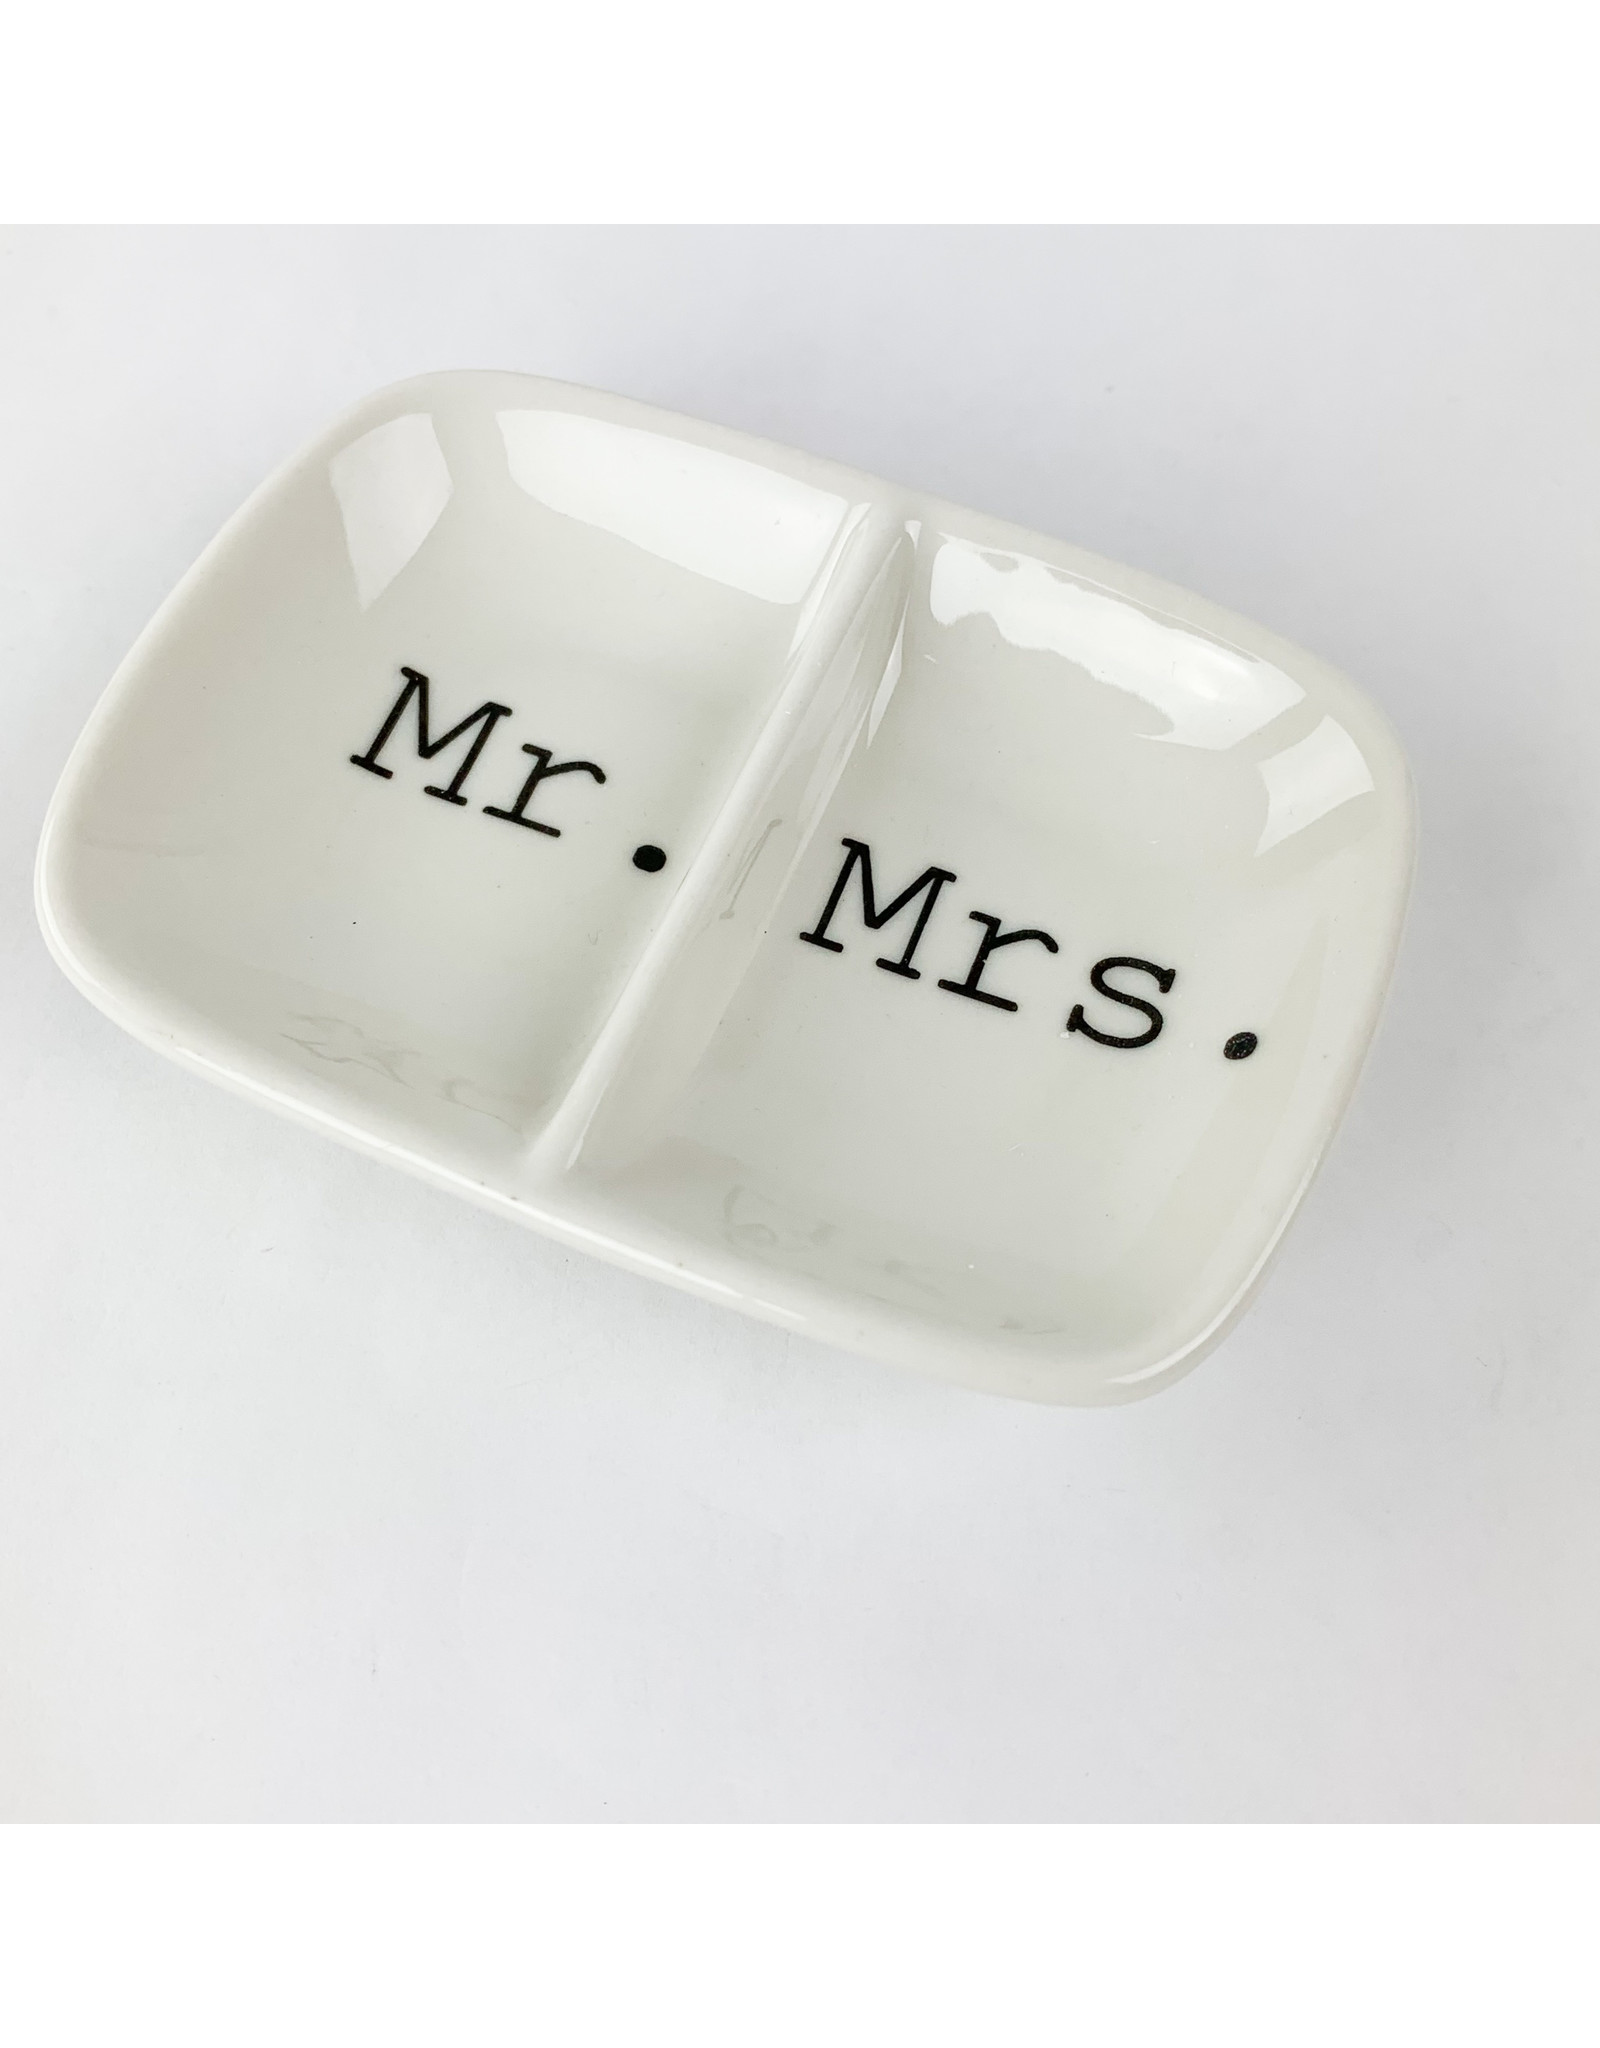 Creative Co-Op Ceramic 2 Section Dish Mr Mrs